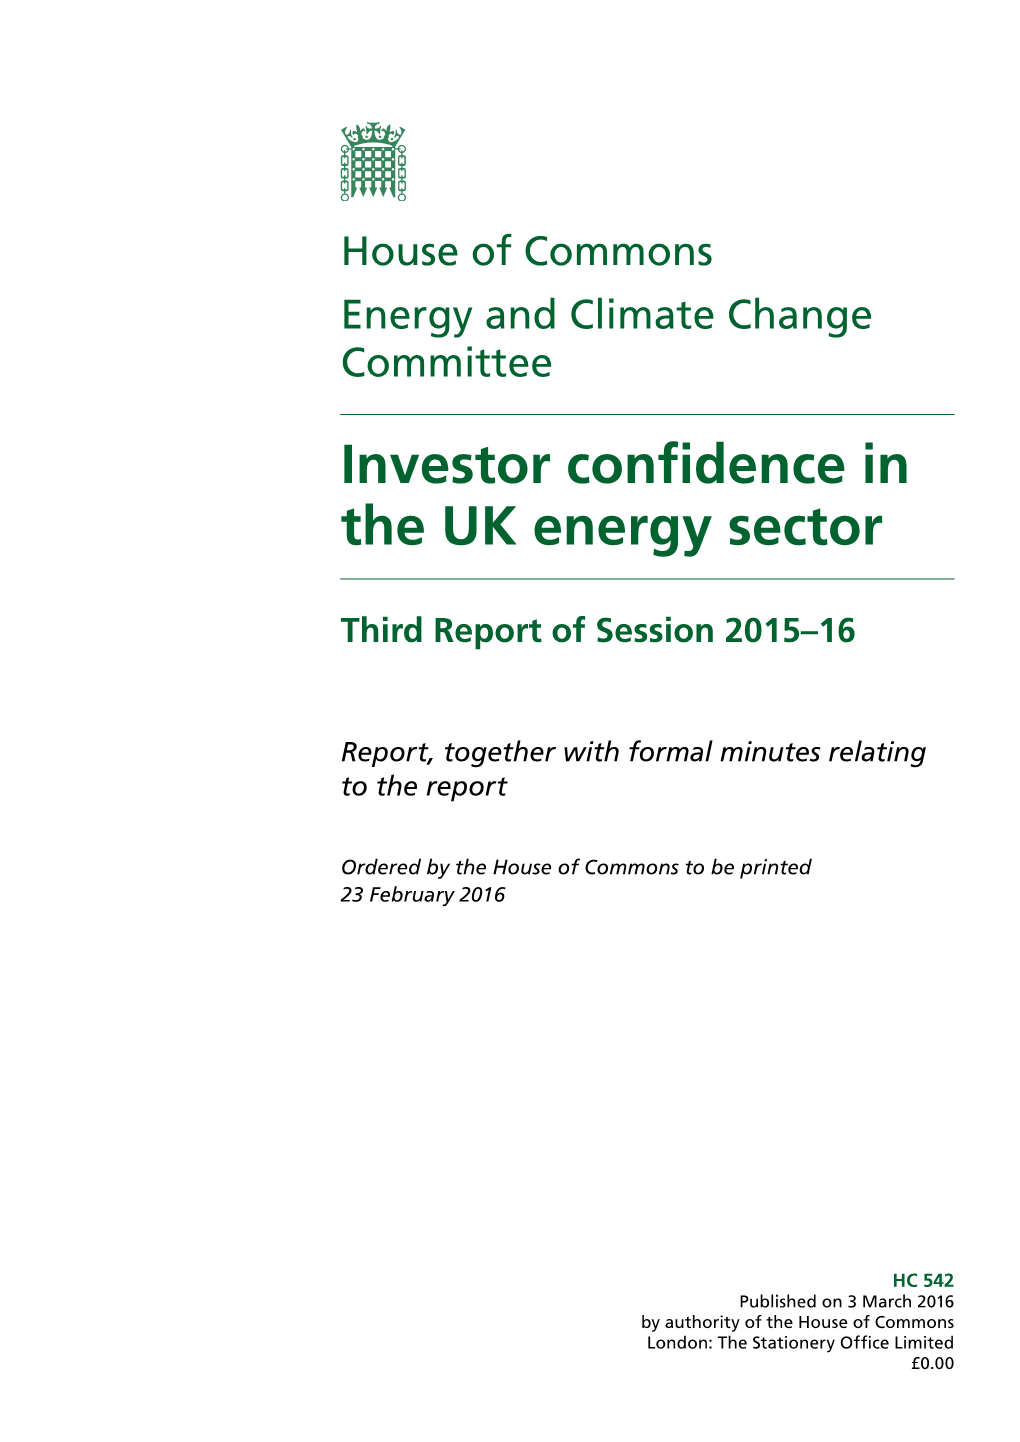 Investor Confidence in the UK Energy Sector